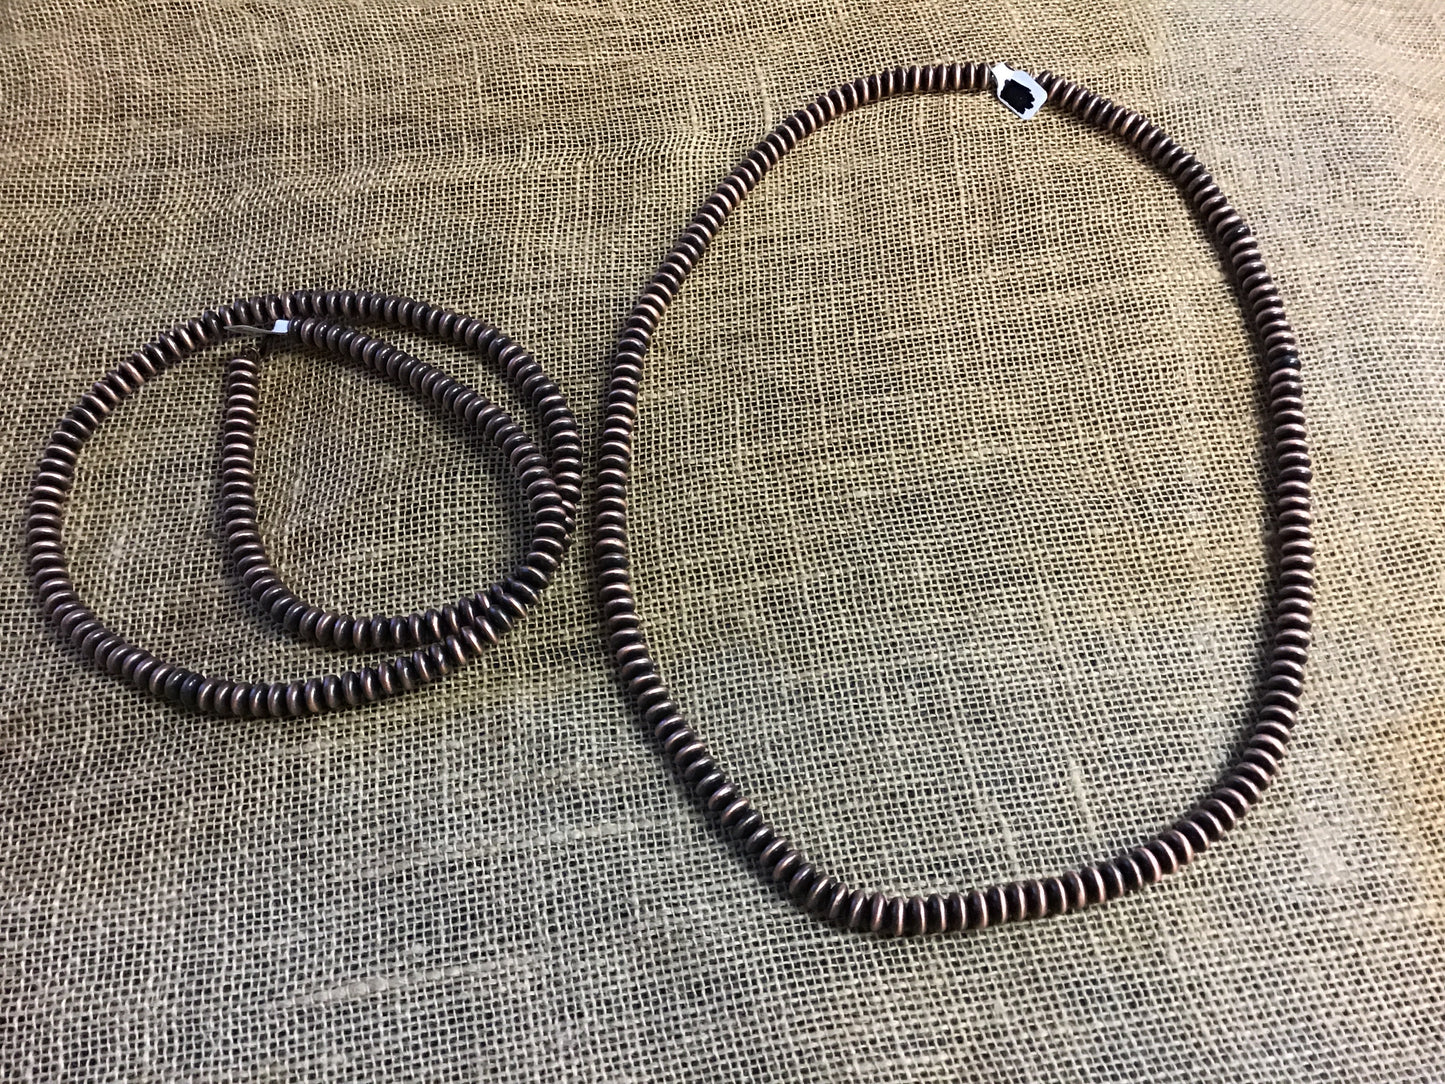 Bead necklace light weight Silver and copper colored in various lengths